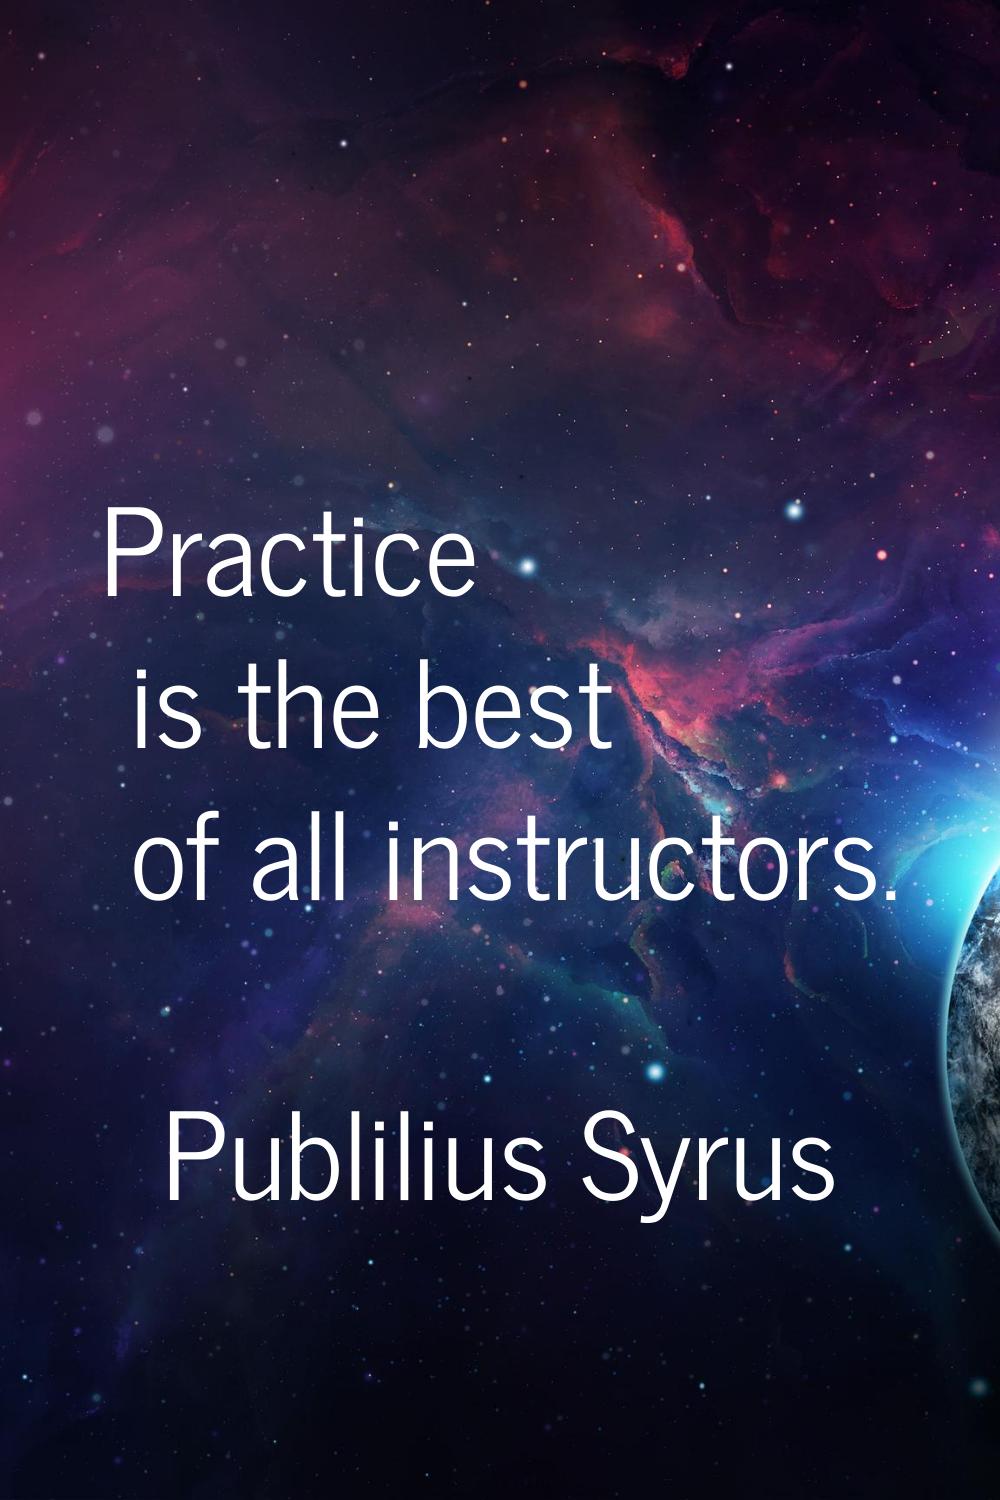 Practice is the best of all instructors.